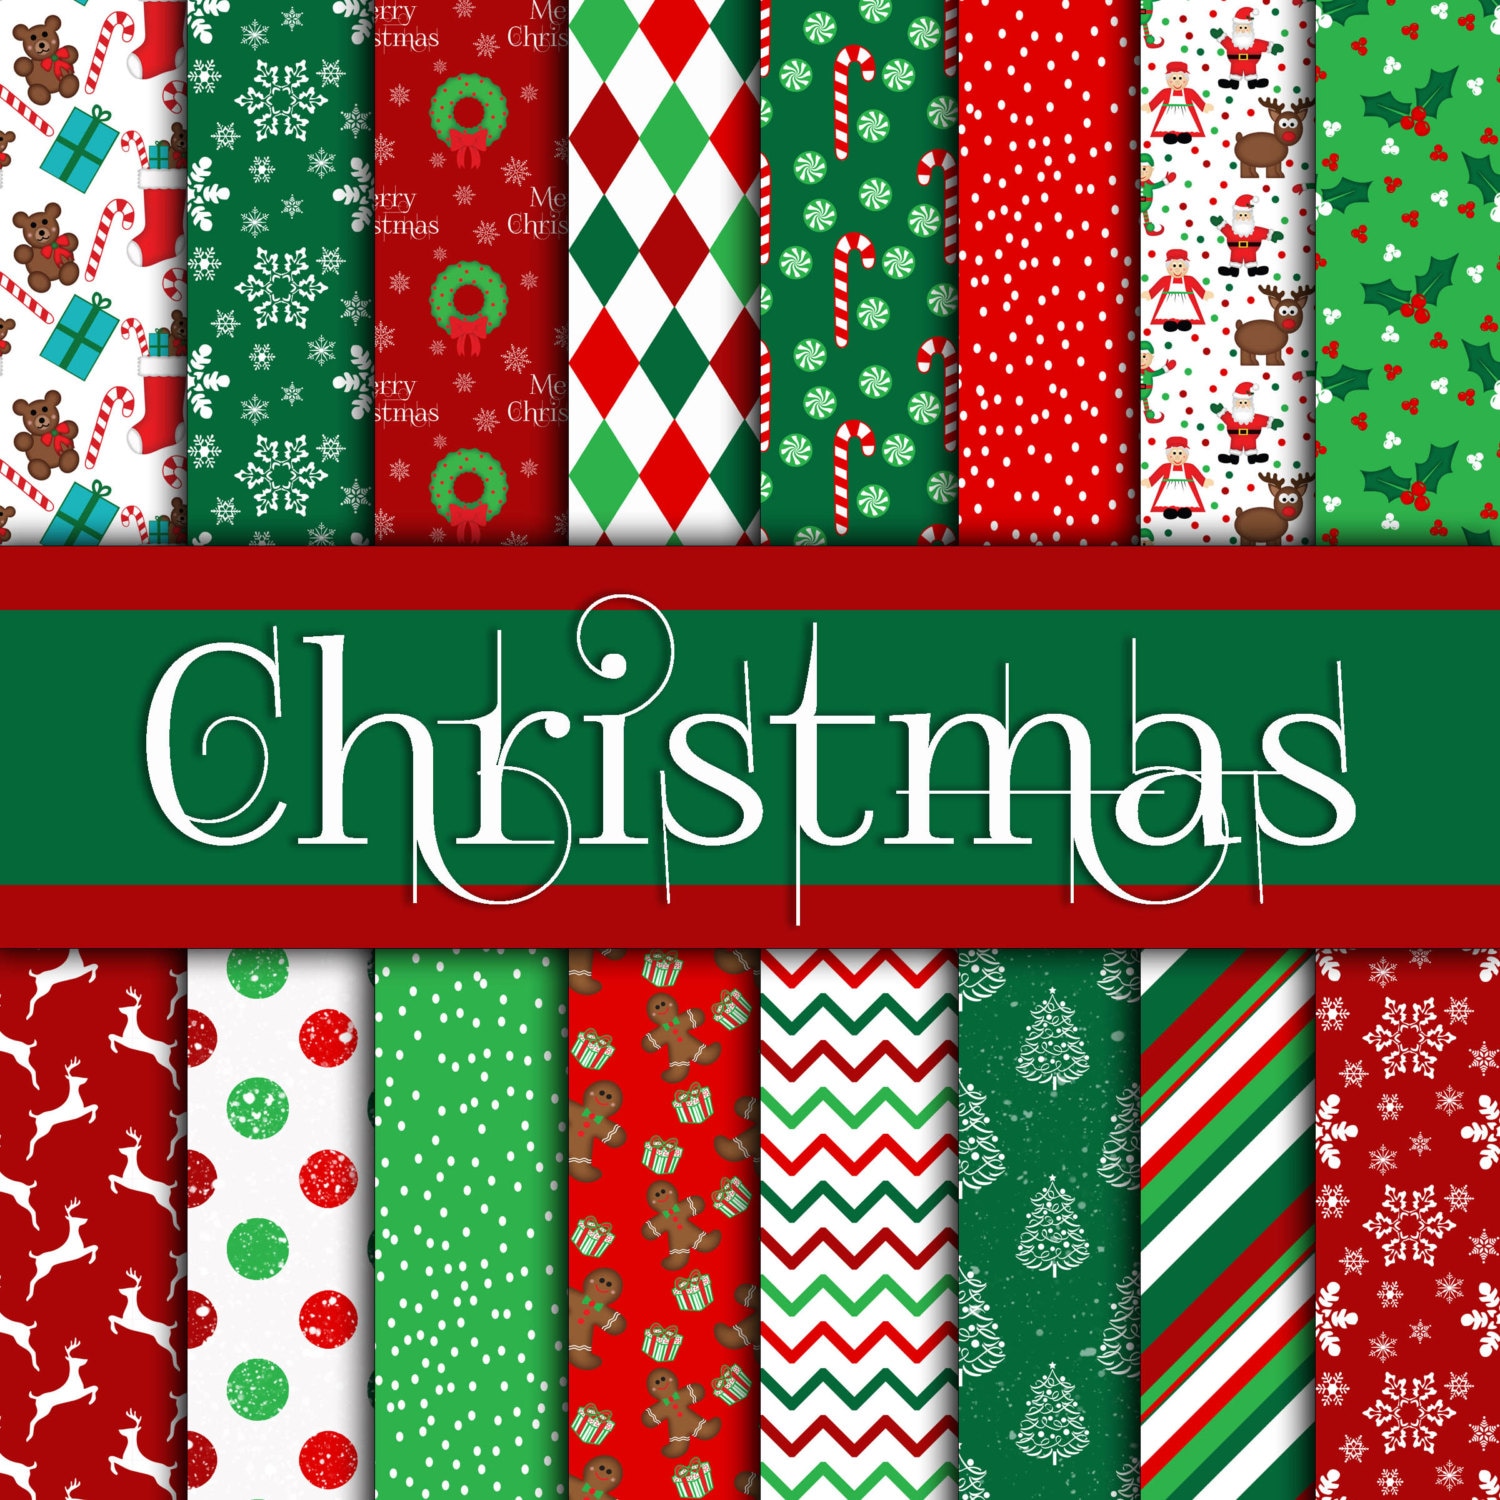 Colorful Paper Christmas Background Stock Photo 701895247